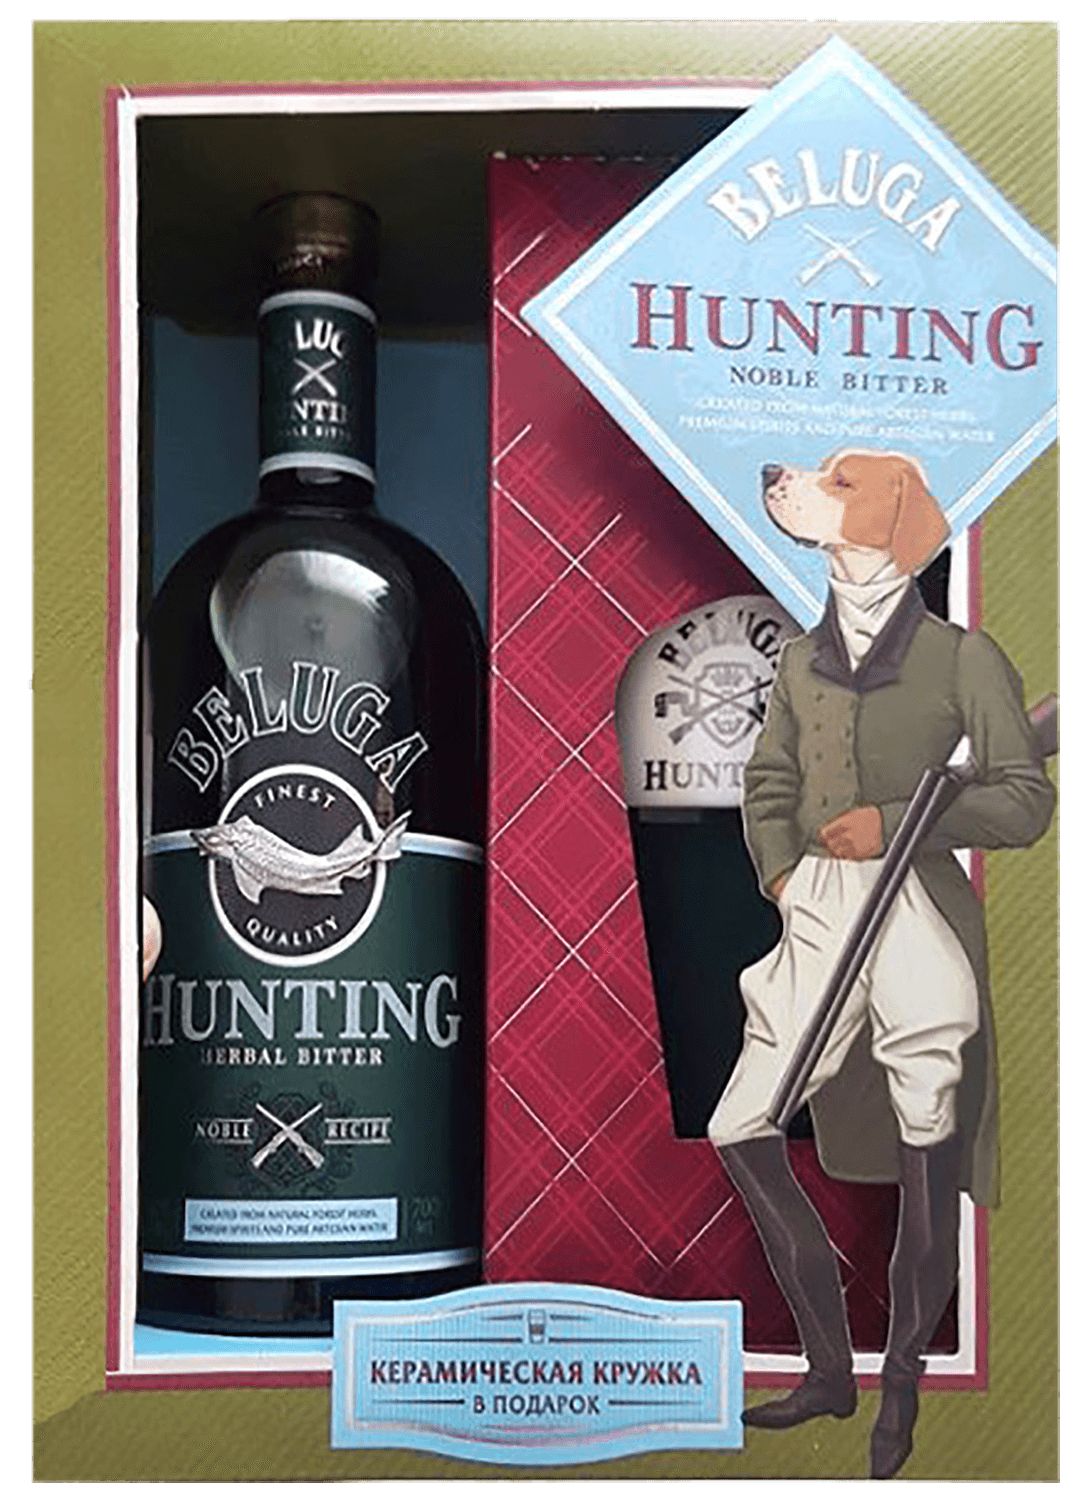 Beluga Hunting Herbal Bitter (gift box with a flask)